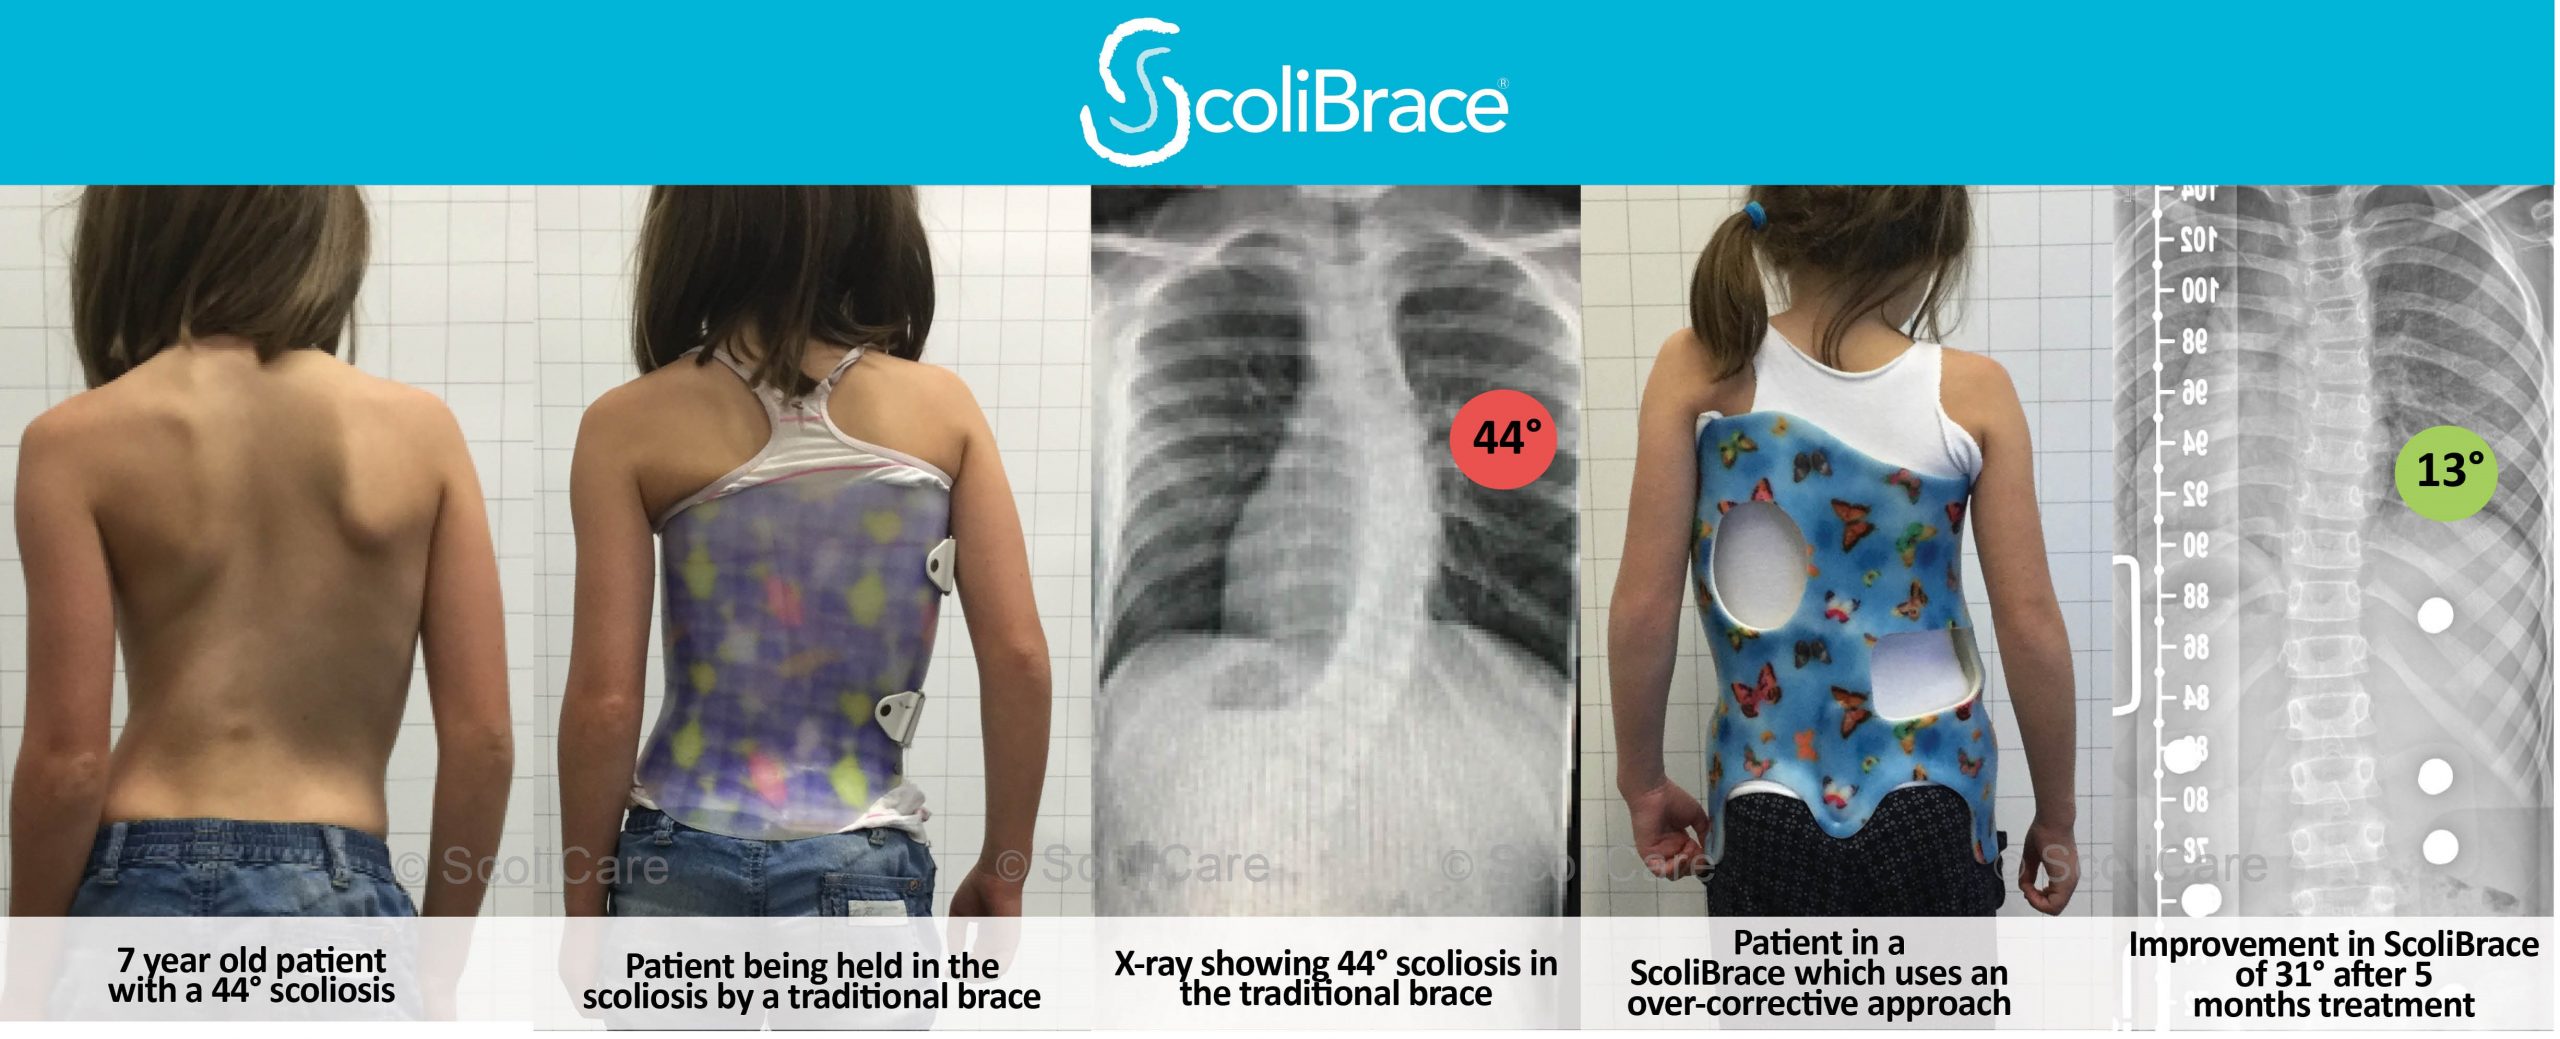 The Brace is On! - Scolios-us